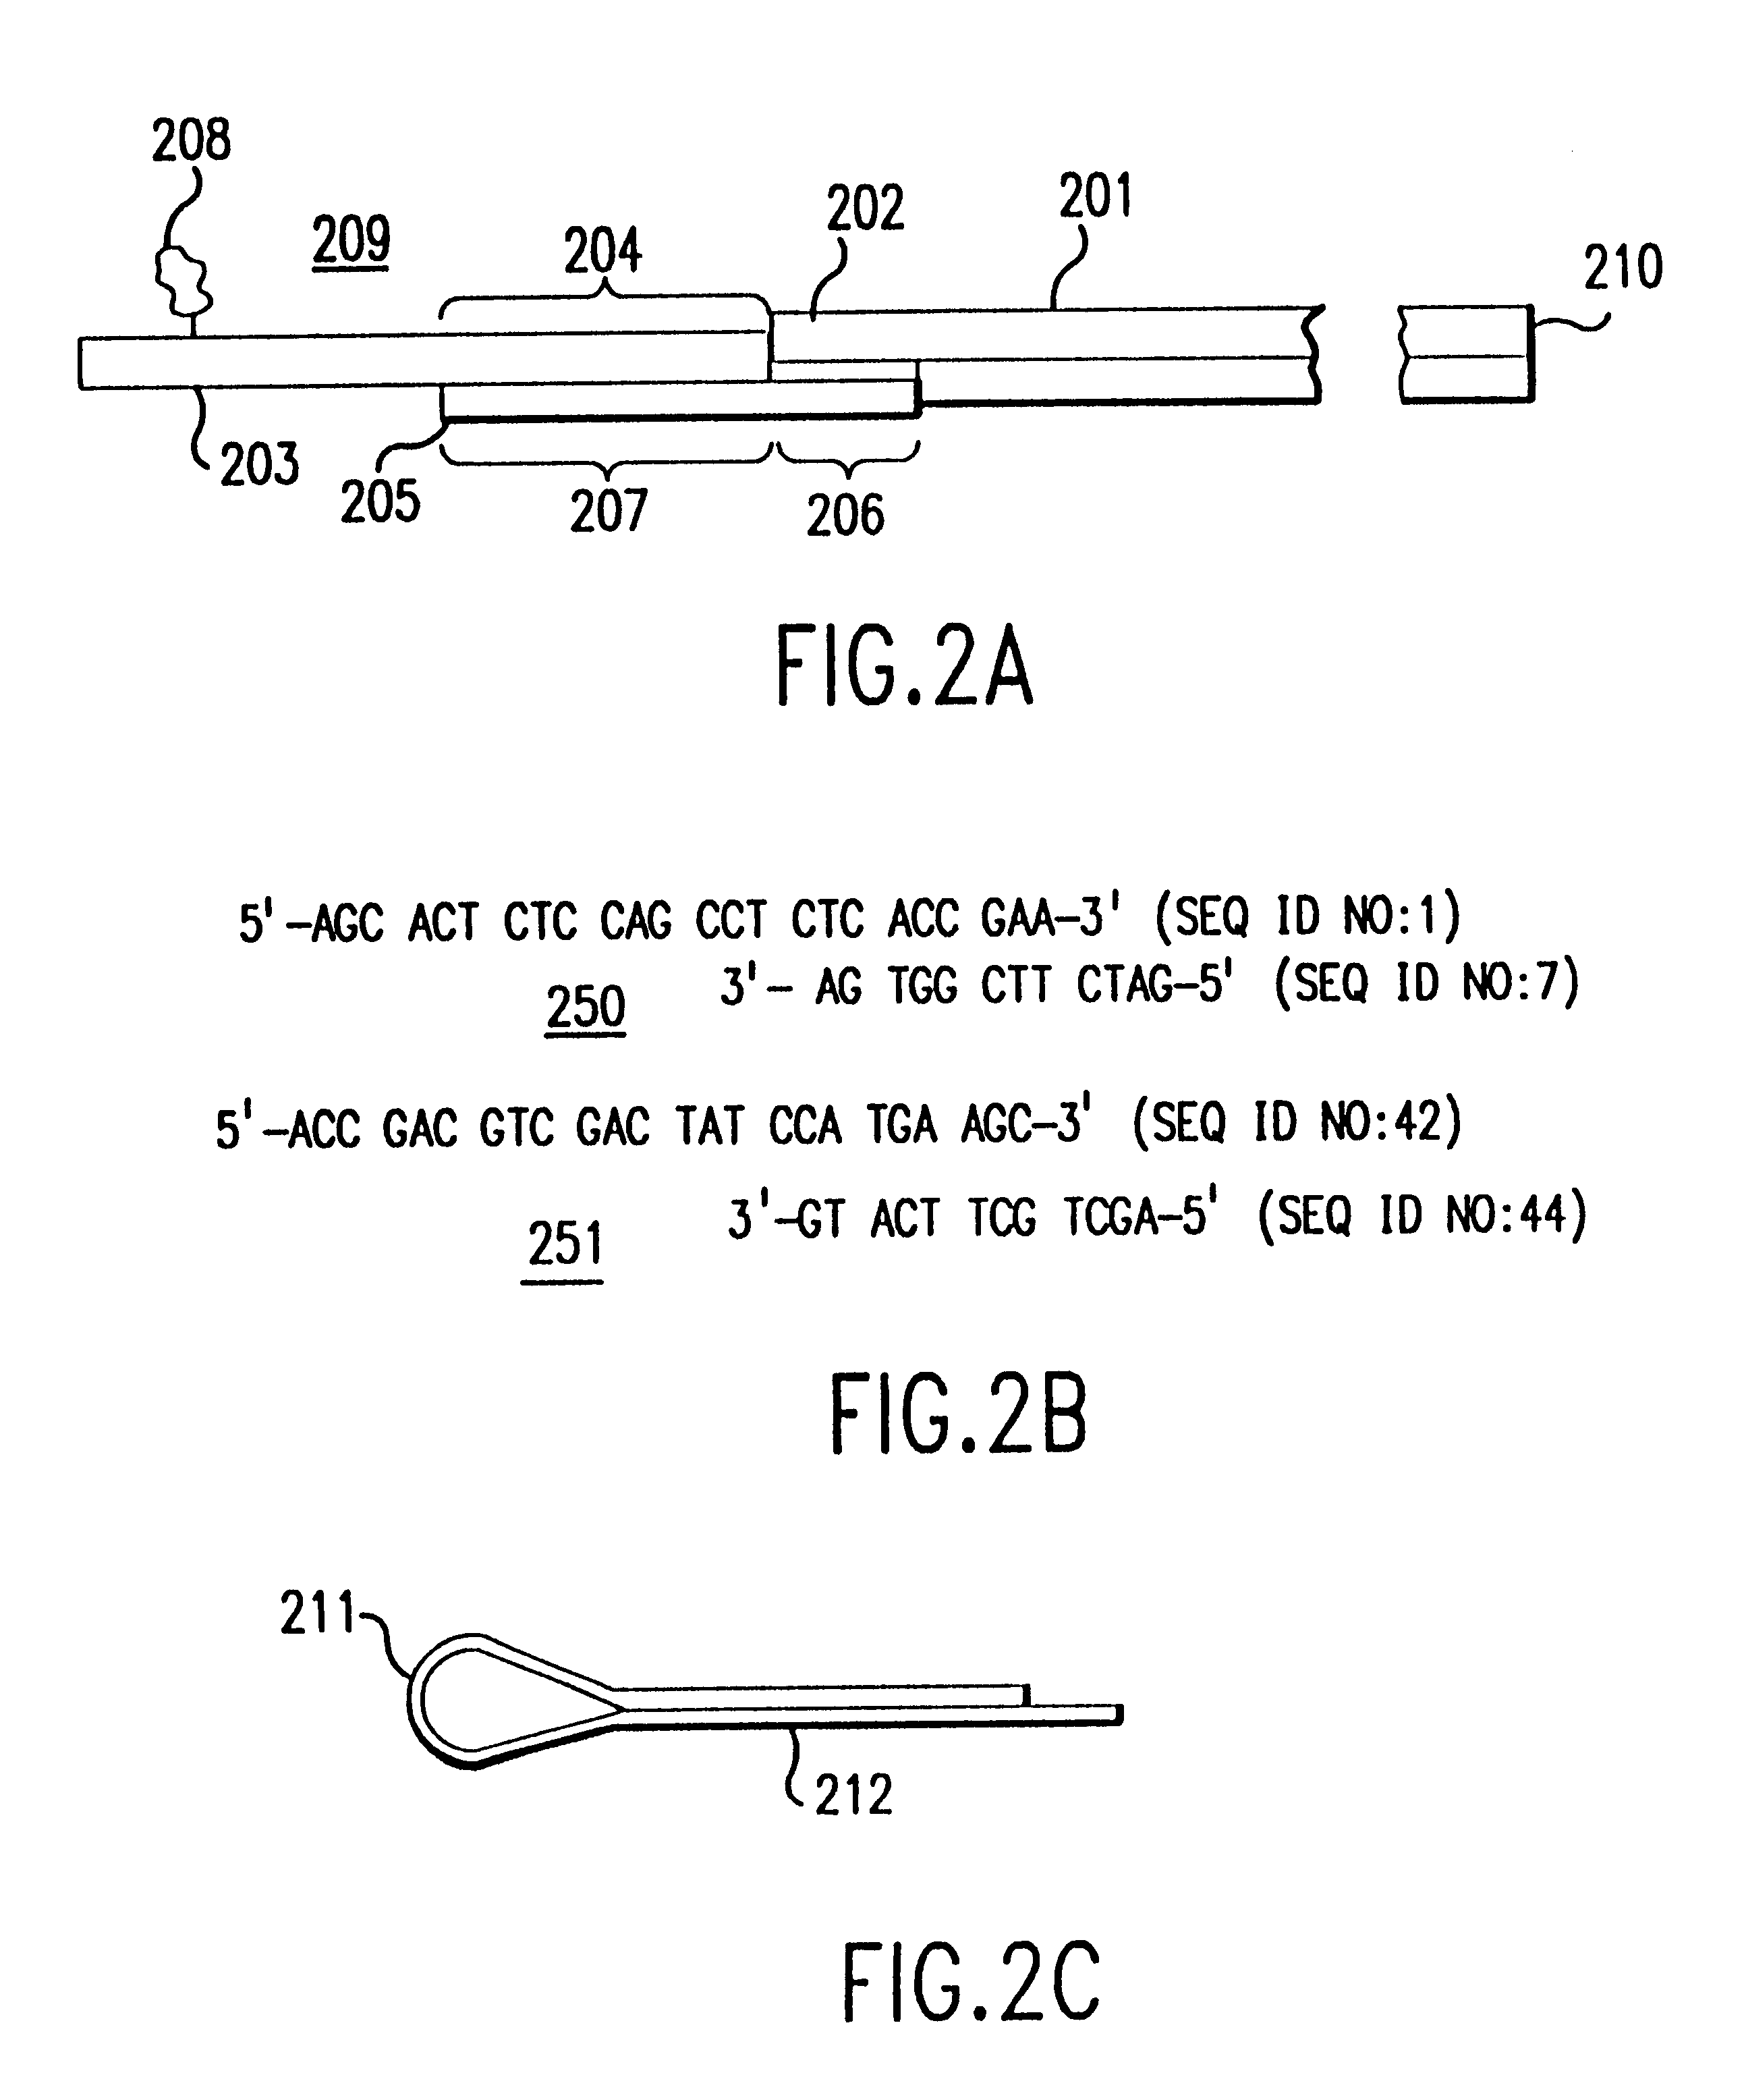 Method and apparatus for identifying, classifying, or quantifying protein sequences in a sample without sequencing